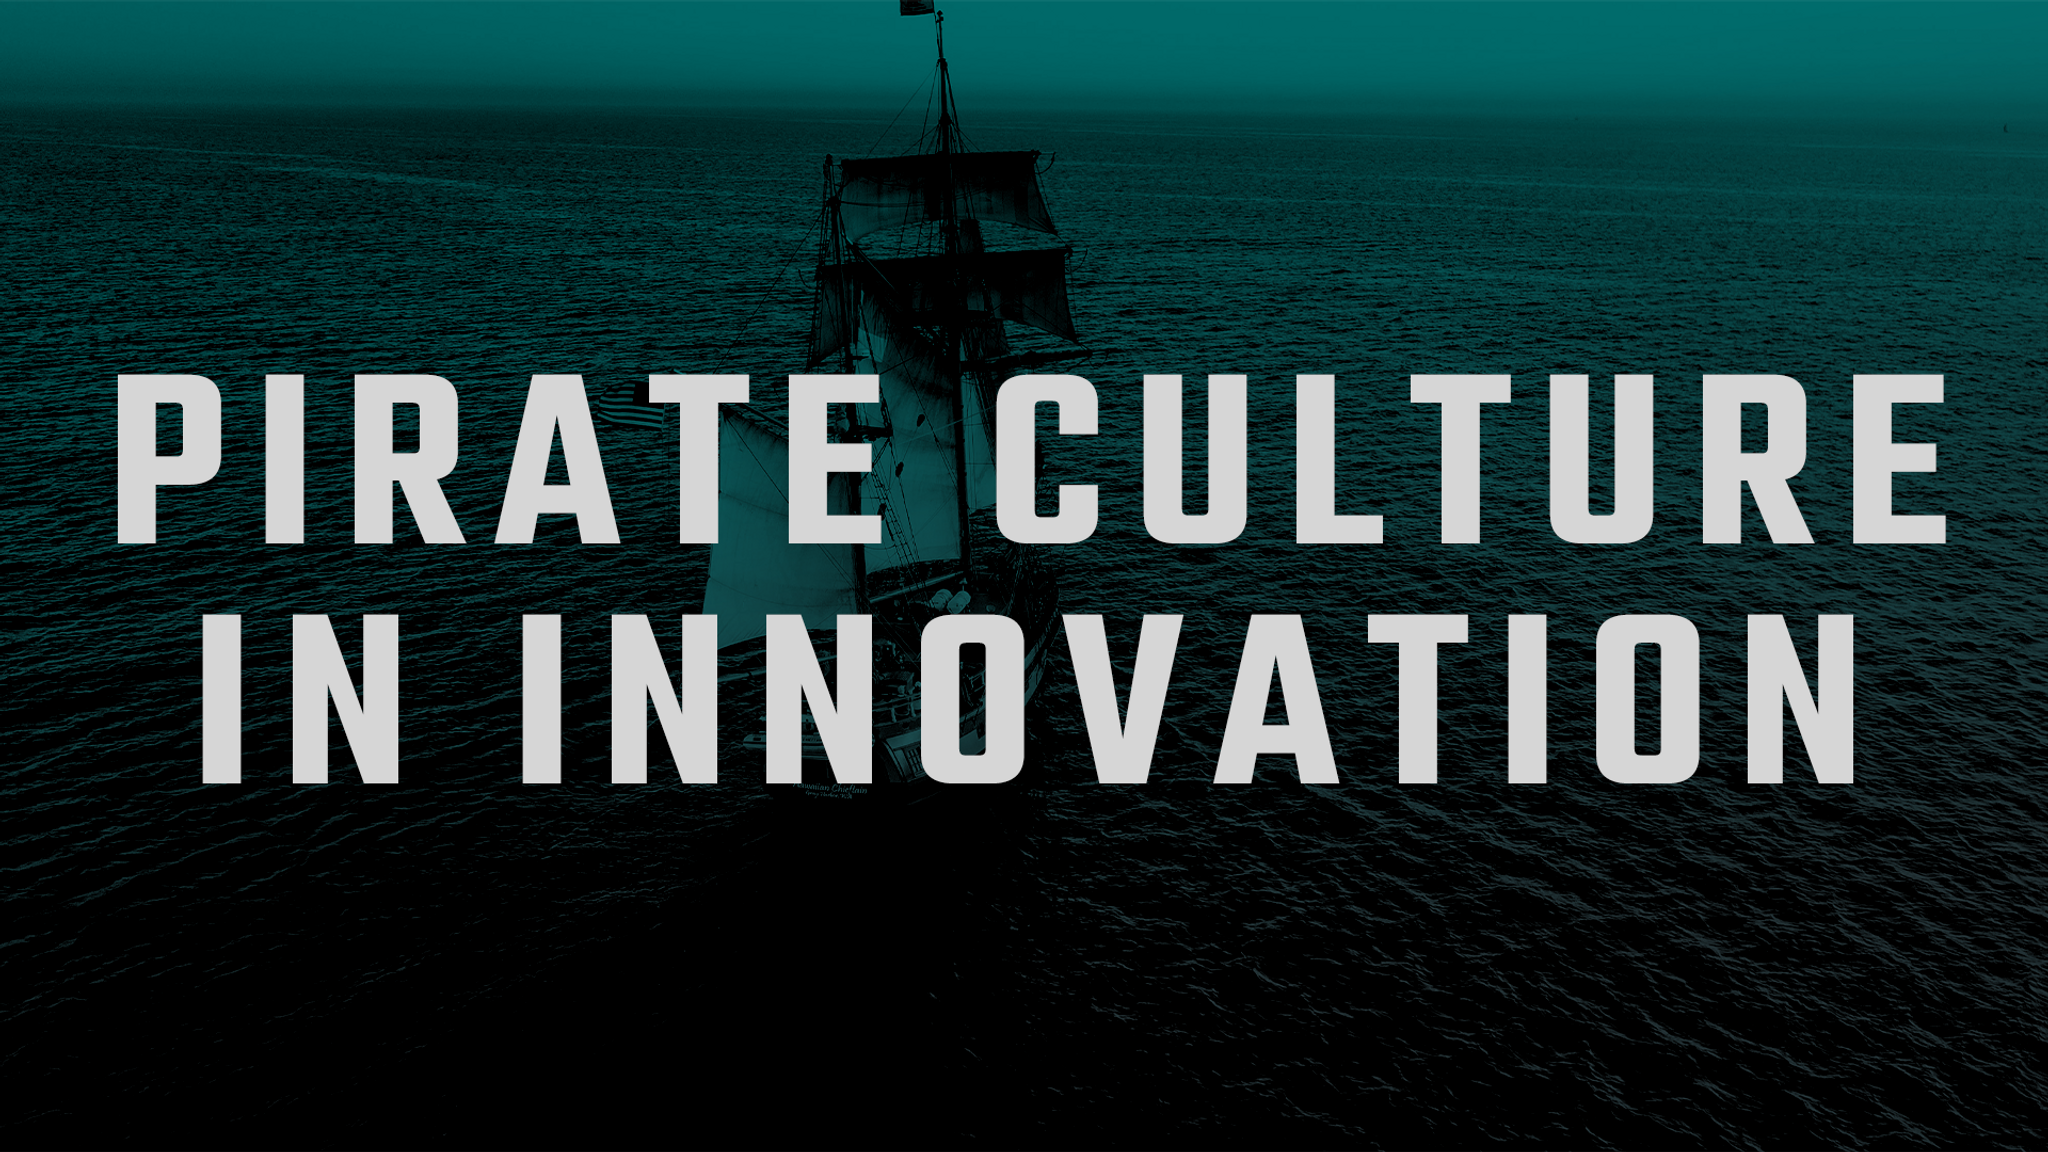 How your organisation’s culture plays vital role in innovation - Pirate Culture (Part 4)